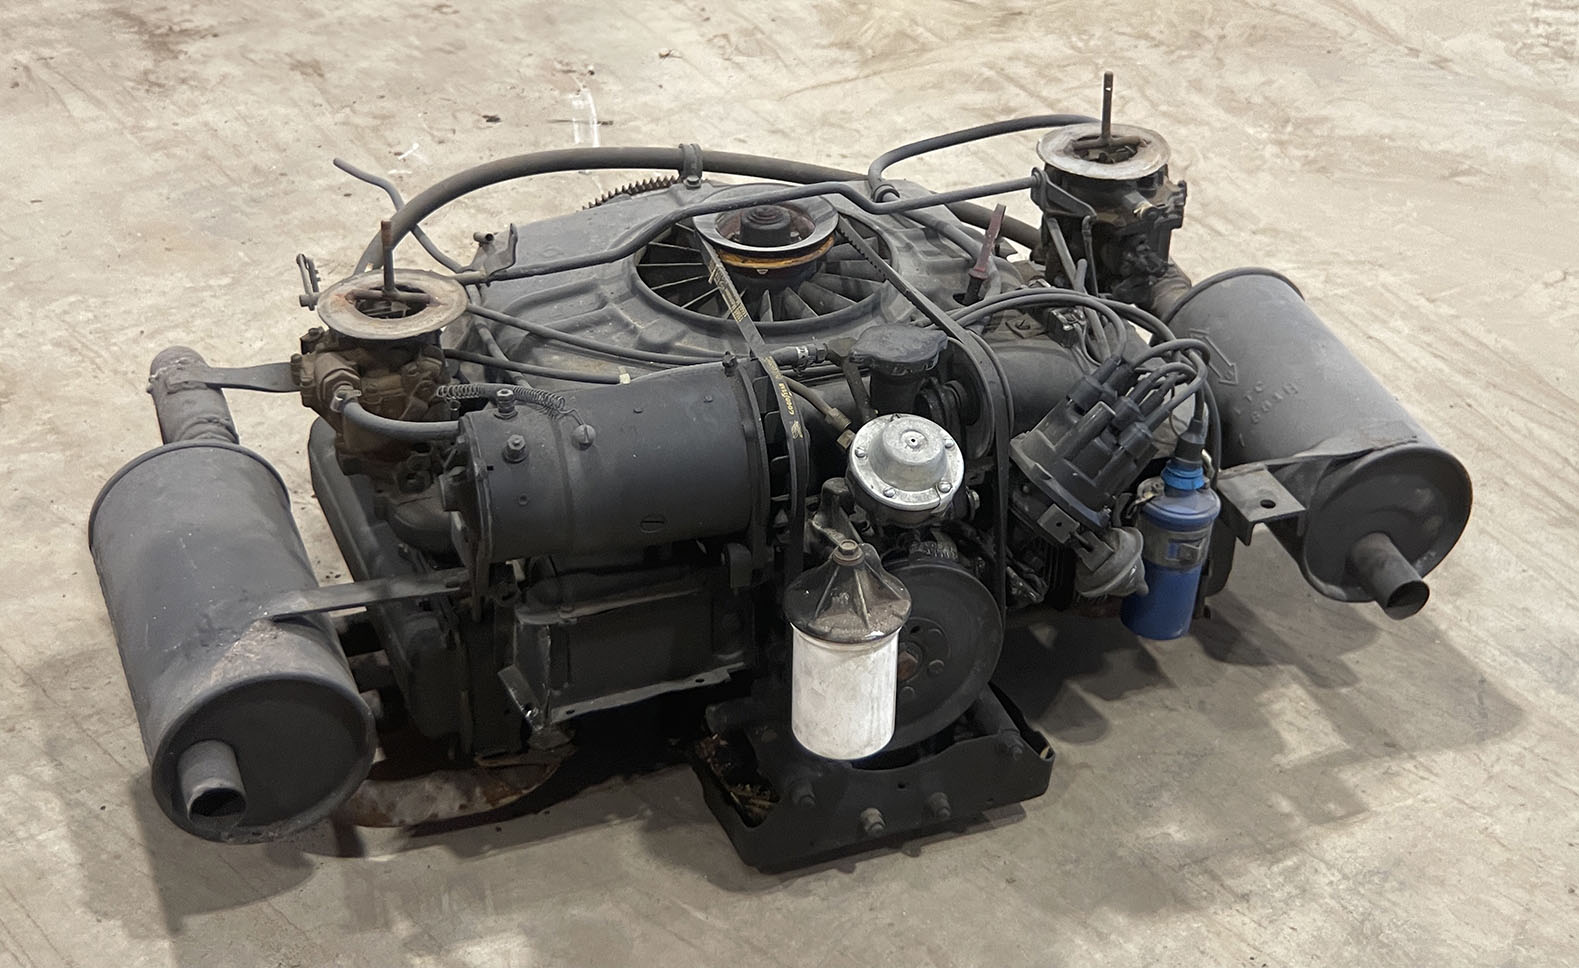 PREOWNED ‘60-’63 CHEVROLET CORVAIR STANDARD, DUAL-CARB ENGINE - - 2.4 LITER // 100HP // 145 CID - MODIFIED FOR A VW BEETLE